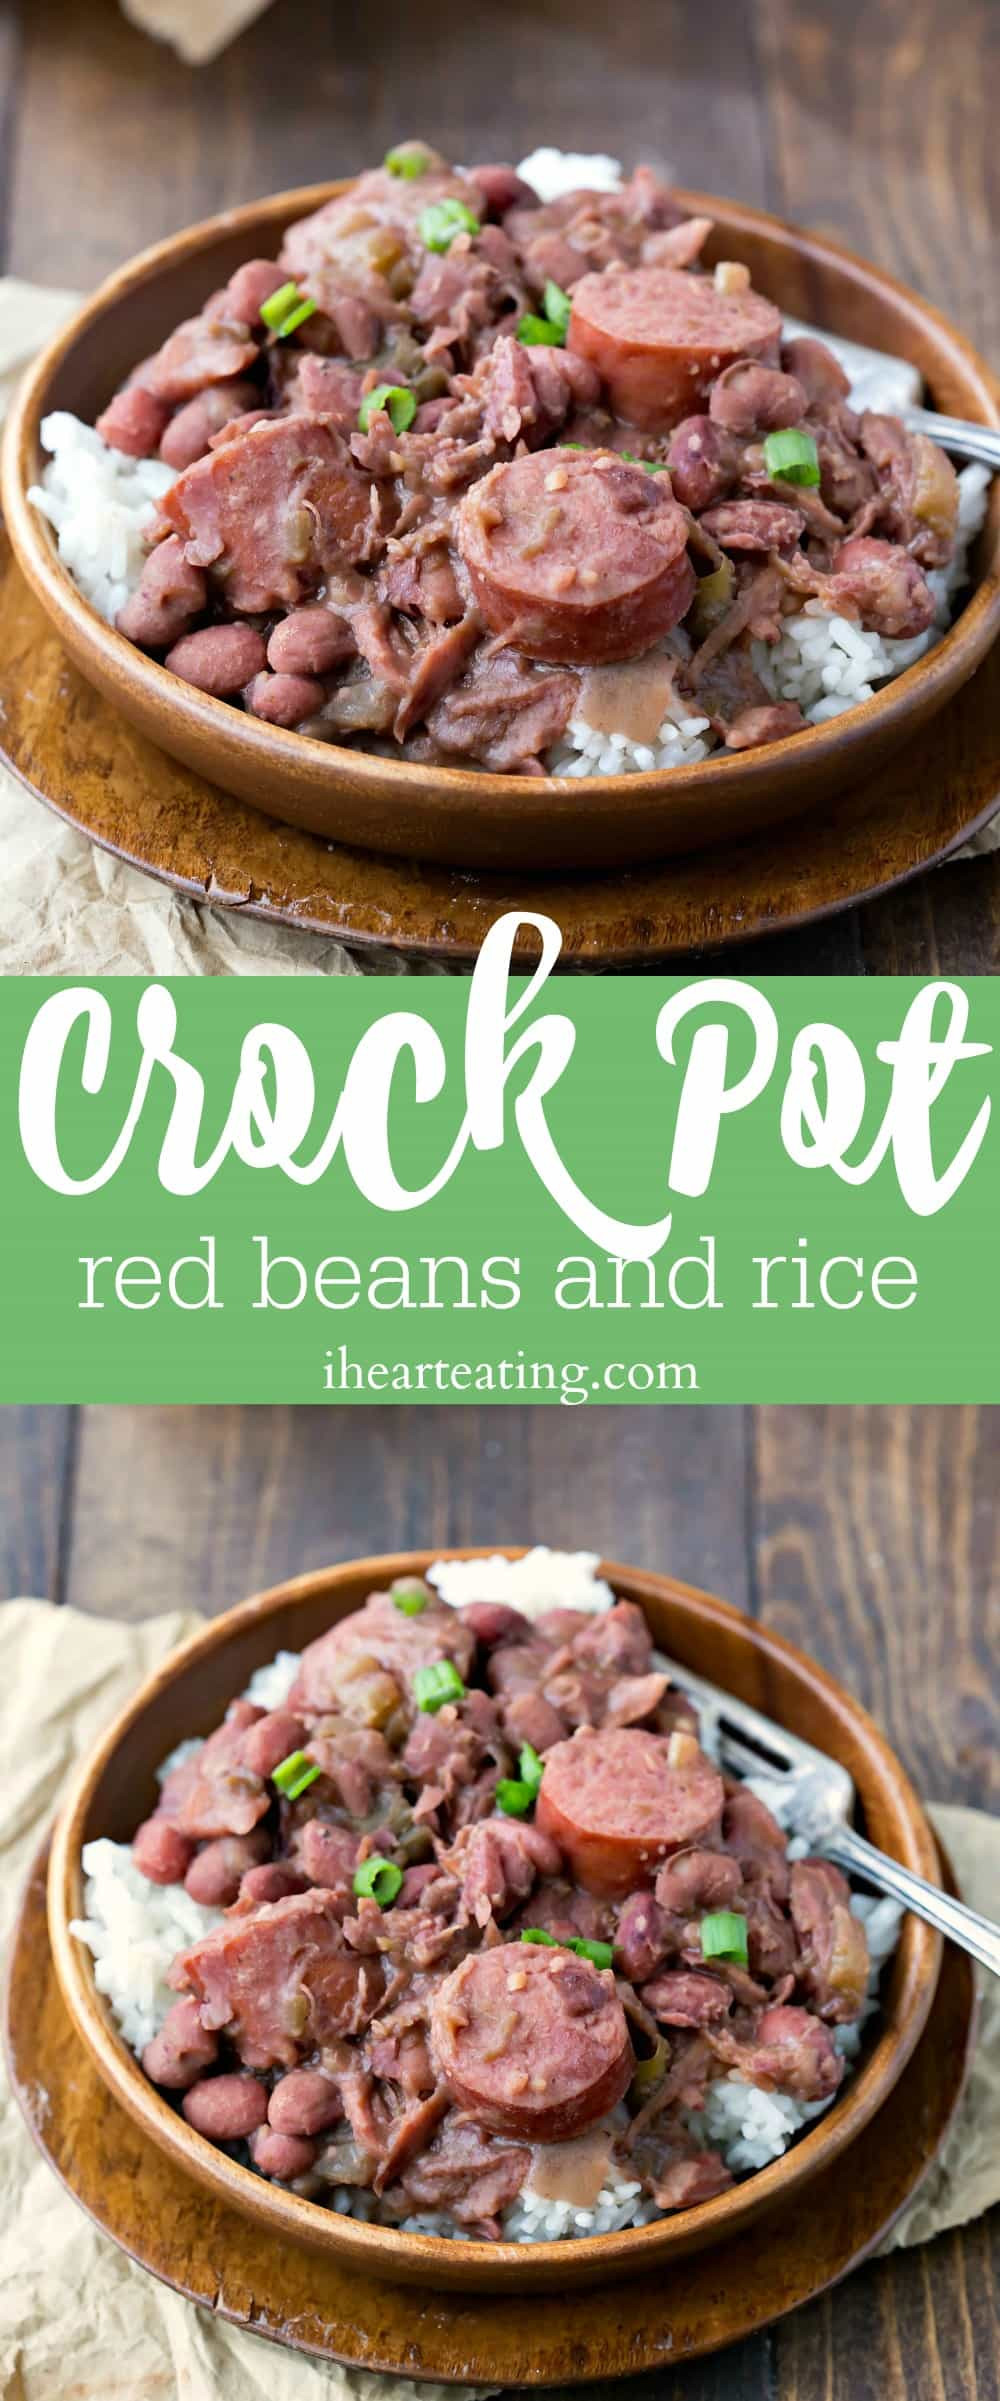 Crock Pot Red Beans And Rice
 Crock Pot Red Beans and Rice i heart eating